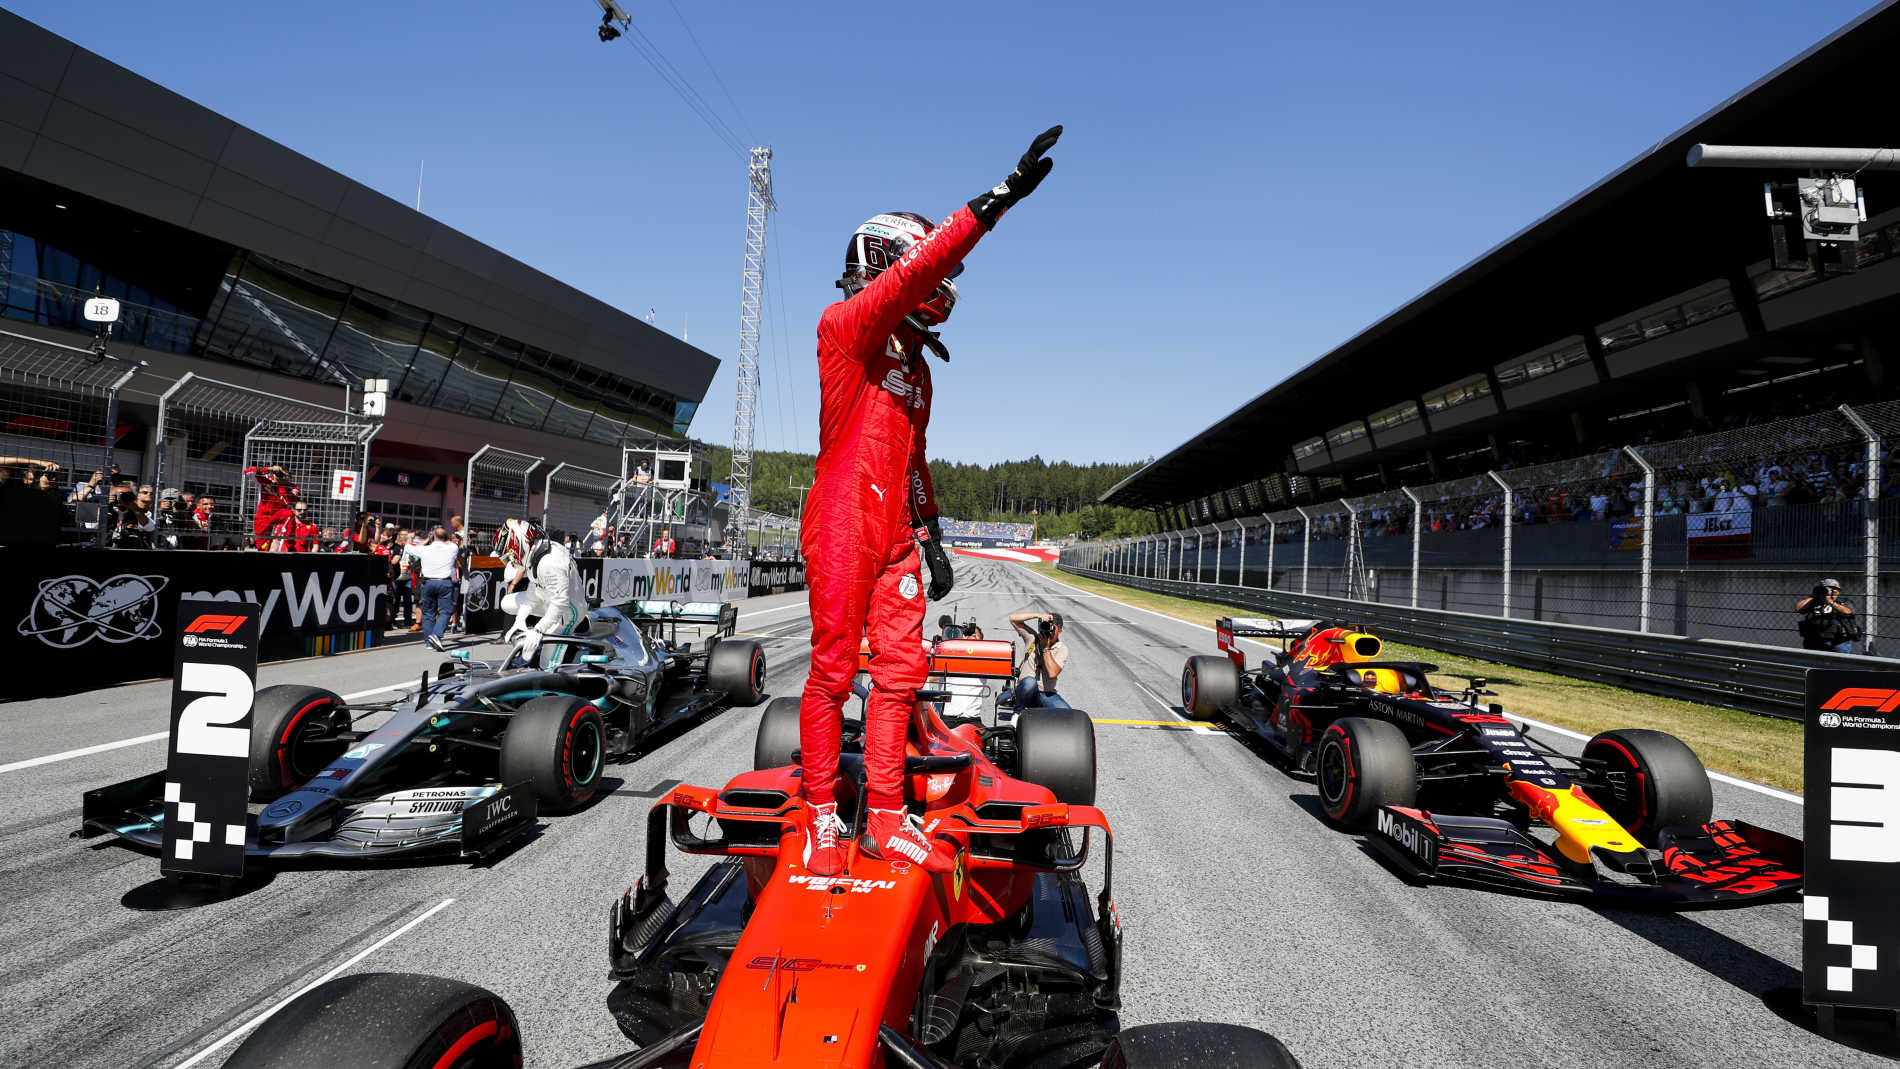 Austrian Grand Prix 2019 Qualifying Report And Highlights Supreme Leclerc Takes Pole In Austria As Mechanical Issue Rules Out Vettel Formula 1